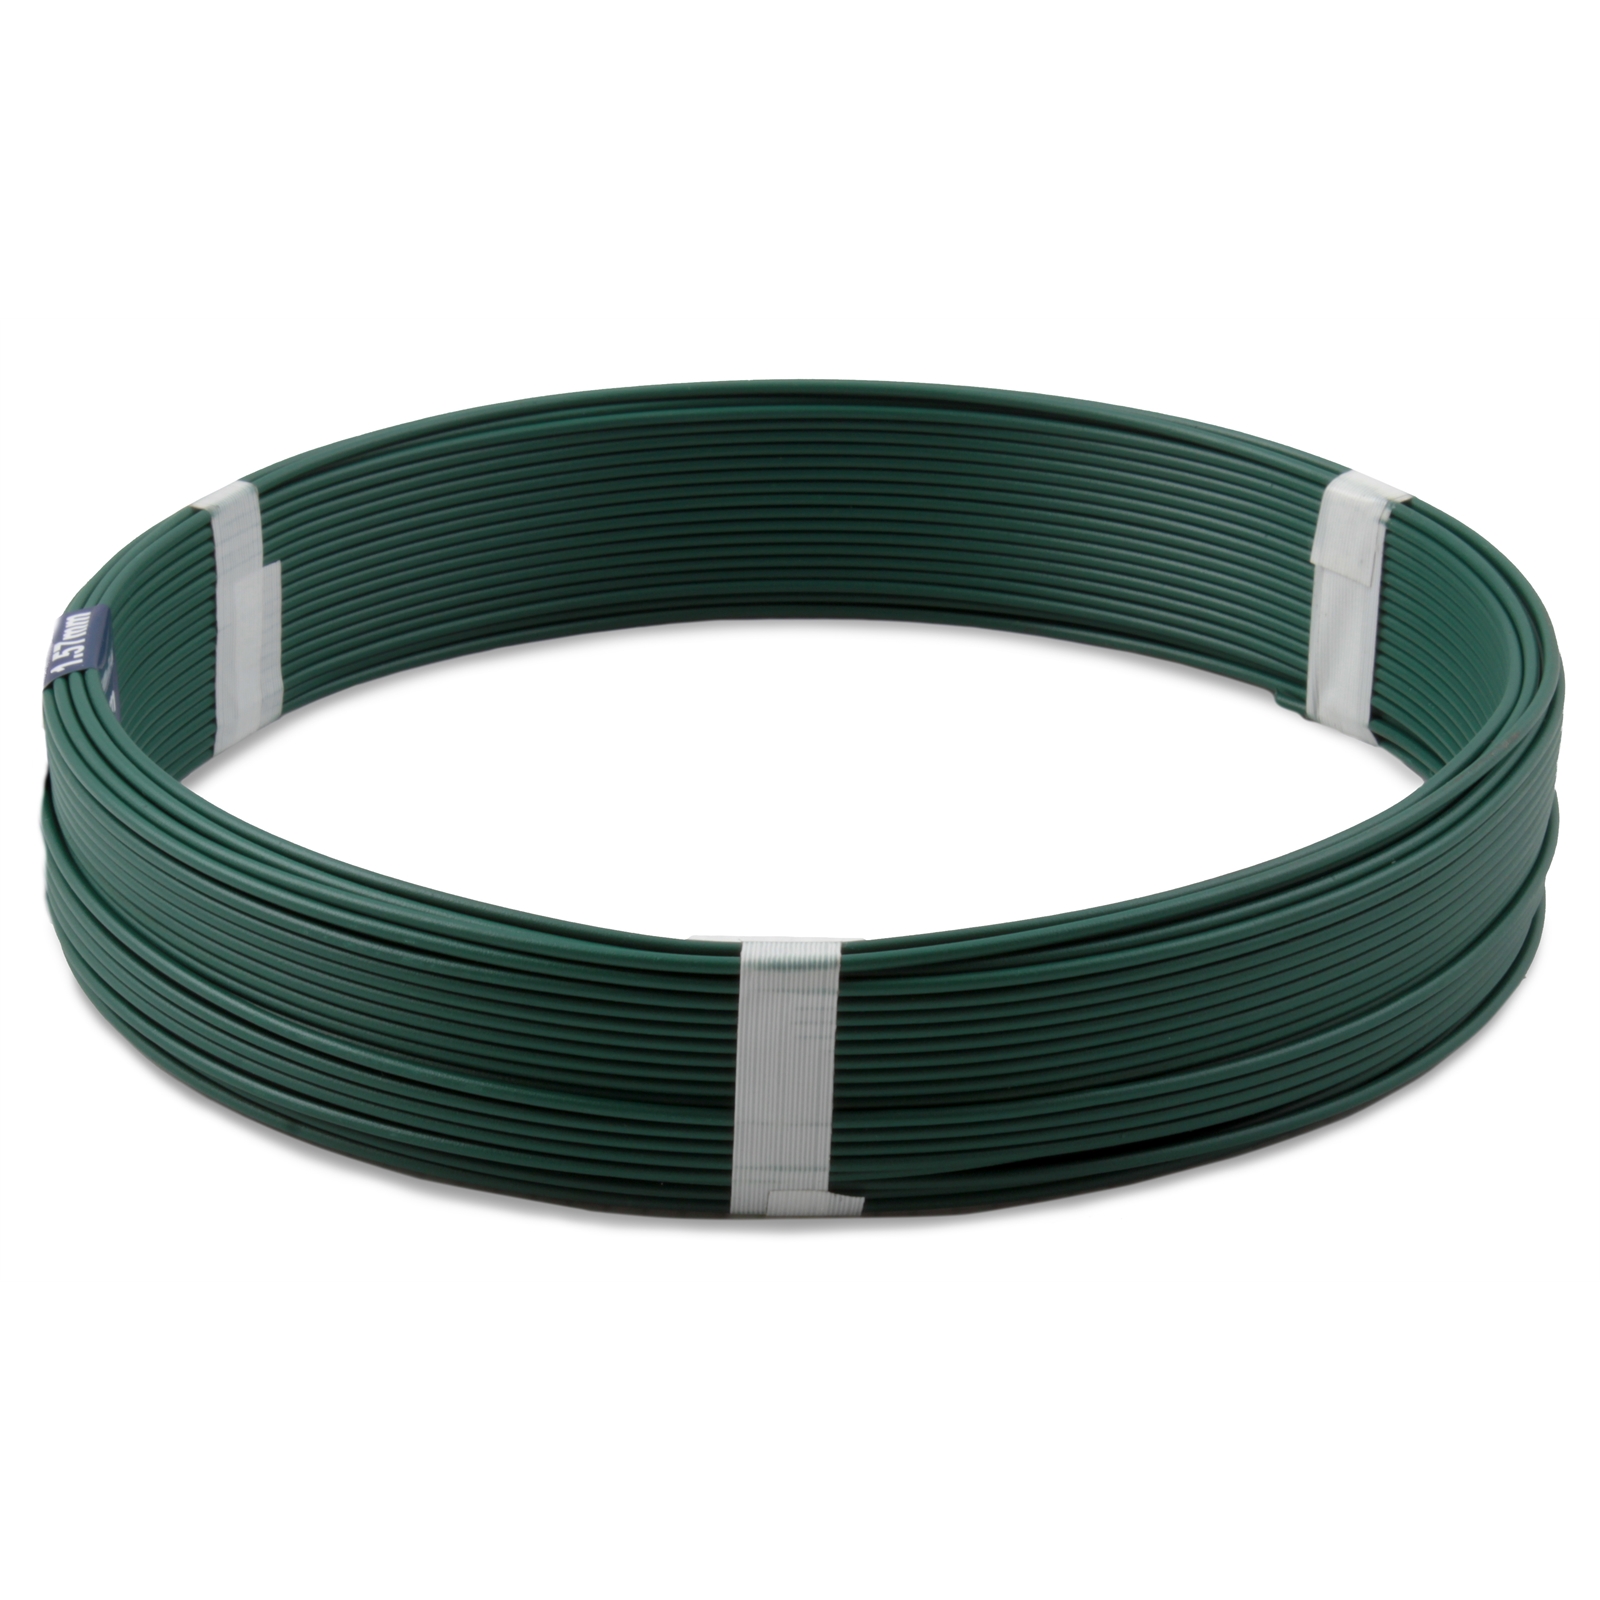 Whites 1.57mm x 50m Green PVC Coated Tie Wire